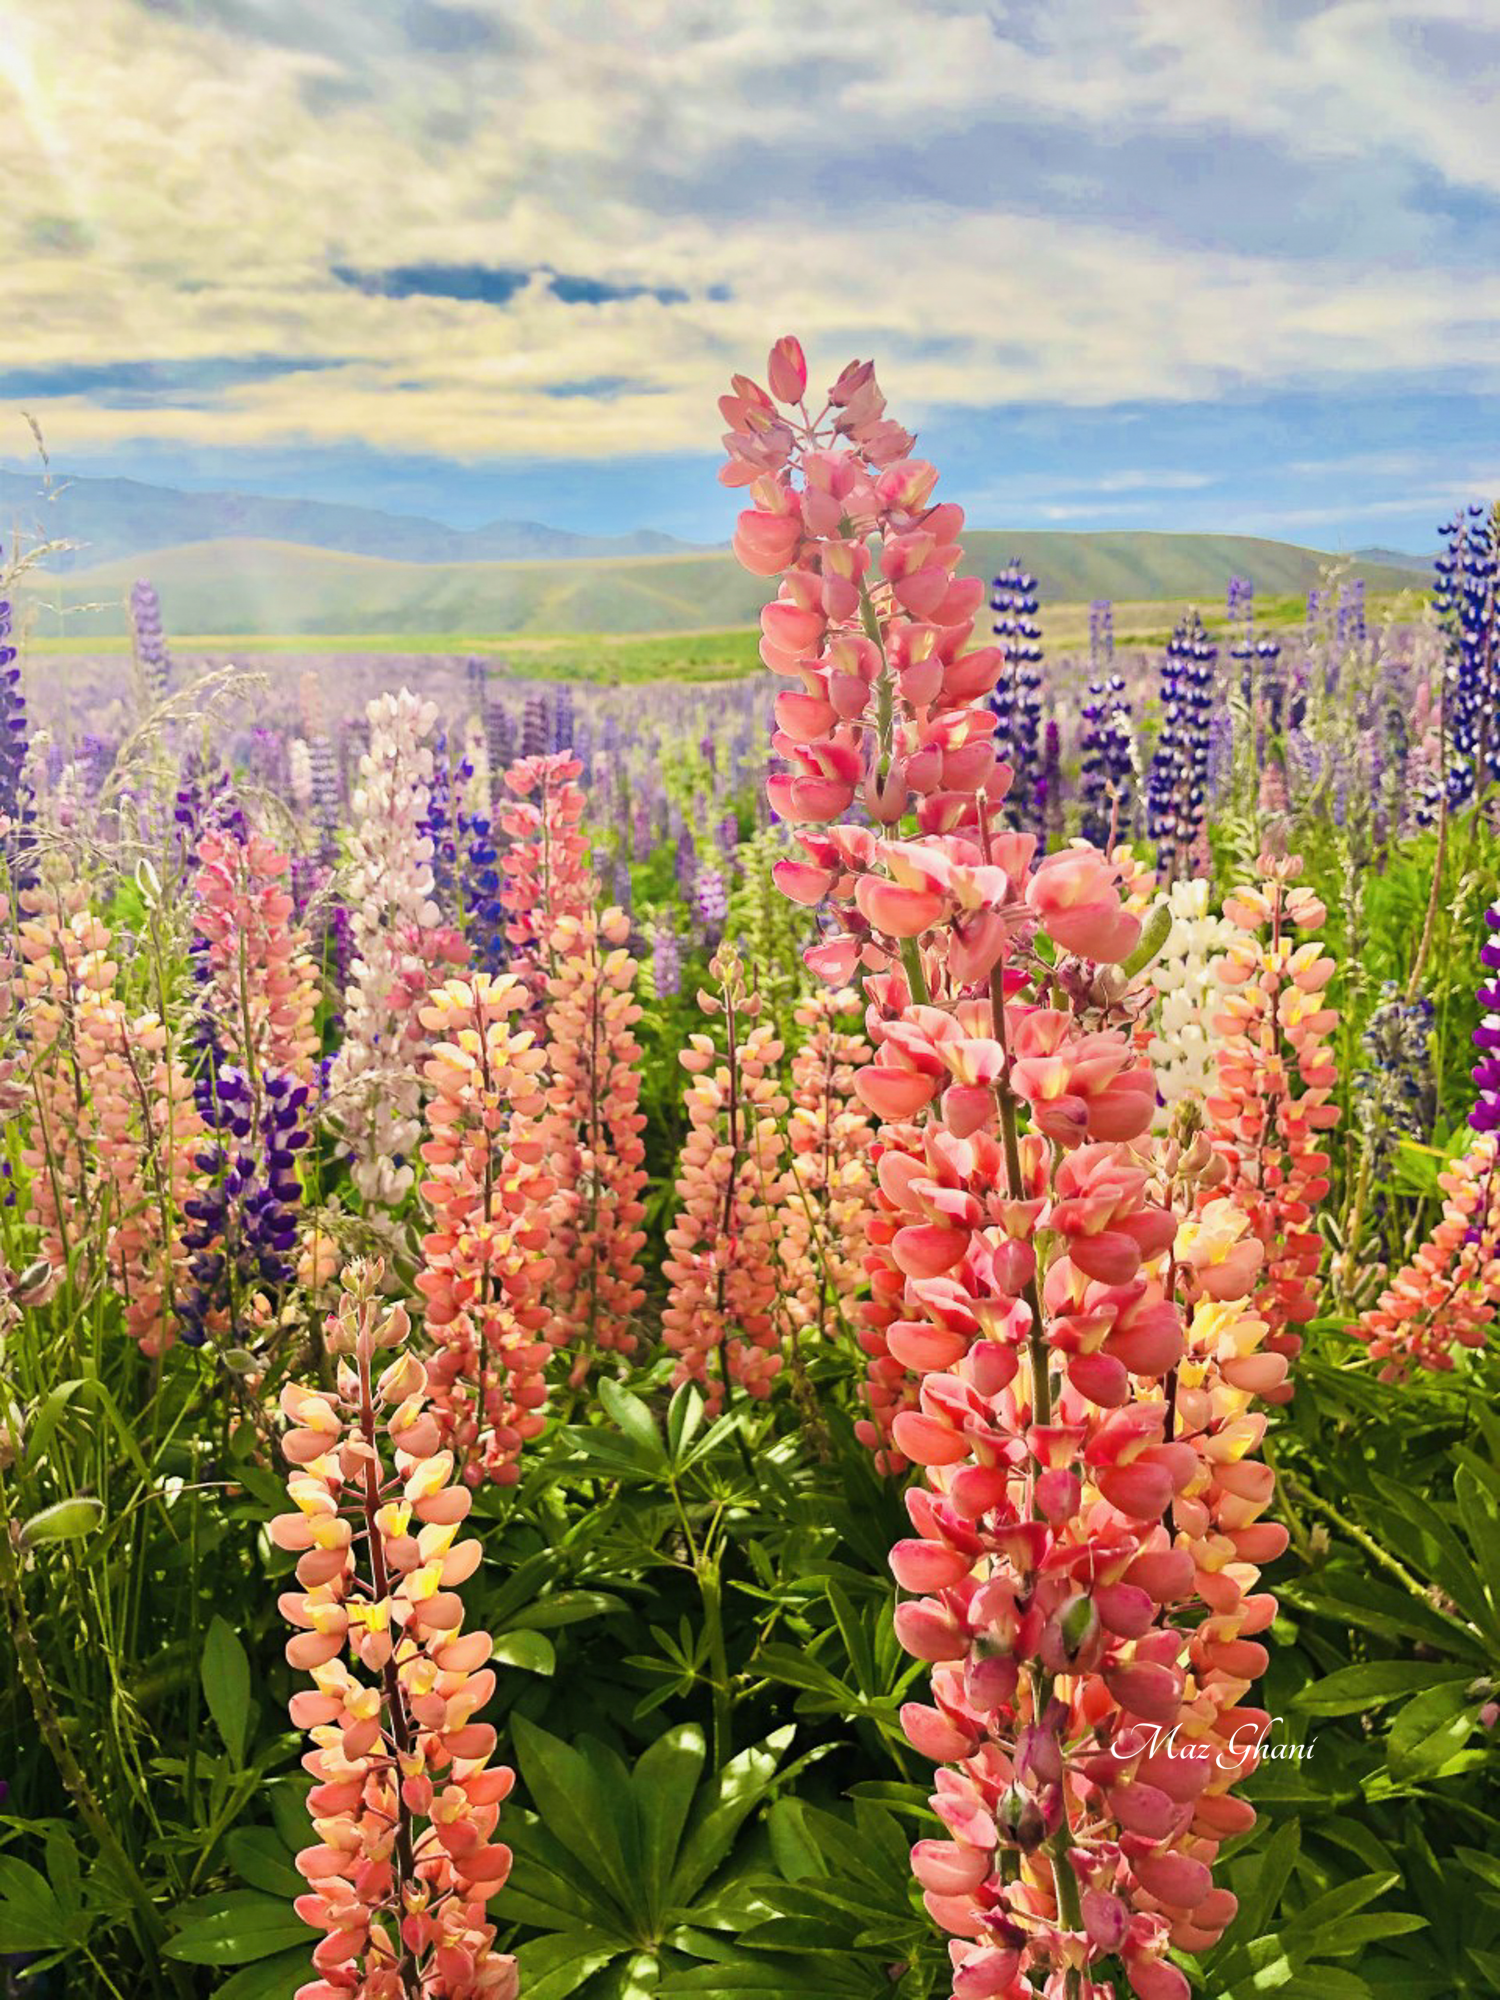 Colorful lupine field of flowers in New Zealand